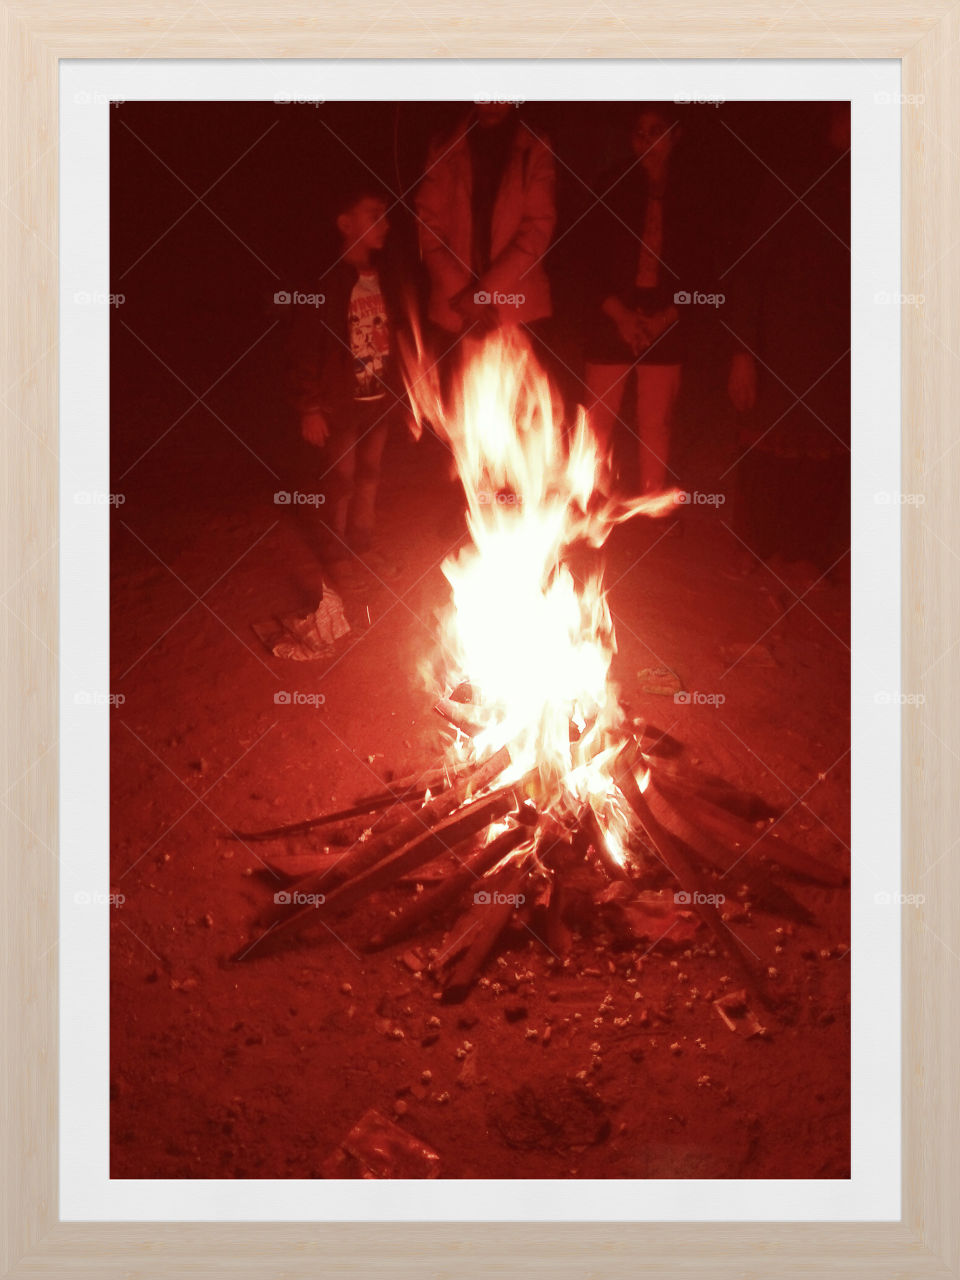 Bon fire on special occasion of Lohri.Hindus special festival. When HOLIka had blessings of God that fire won't b able to burn  HOLIka only if she do not do any wrong deeds but she tried to kill prahlaad an innocent God child and the blessing became curse and she was burnt.